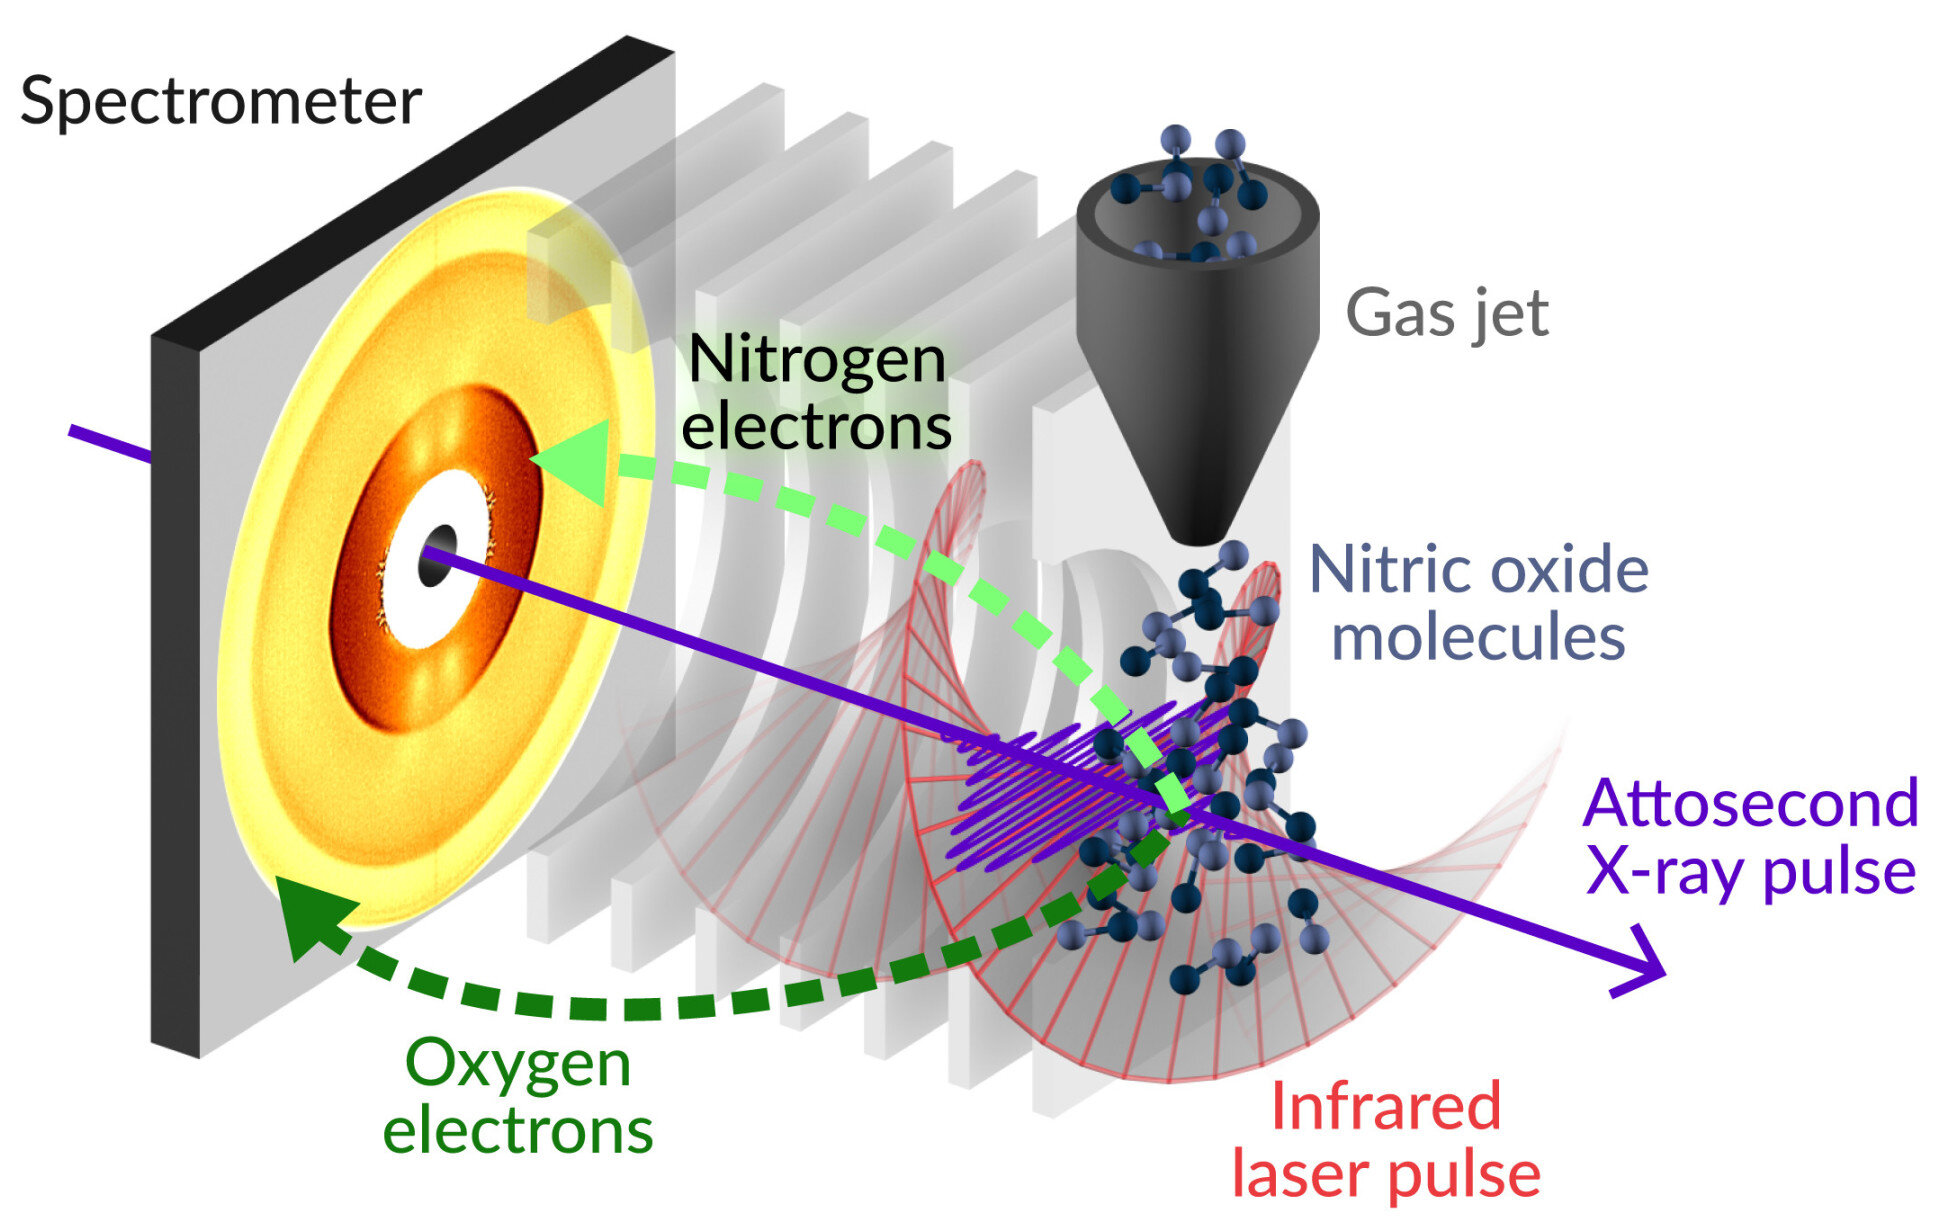 Fastest-ever study of how electrons respond to X-rays performed - The News Motion